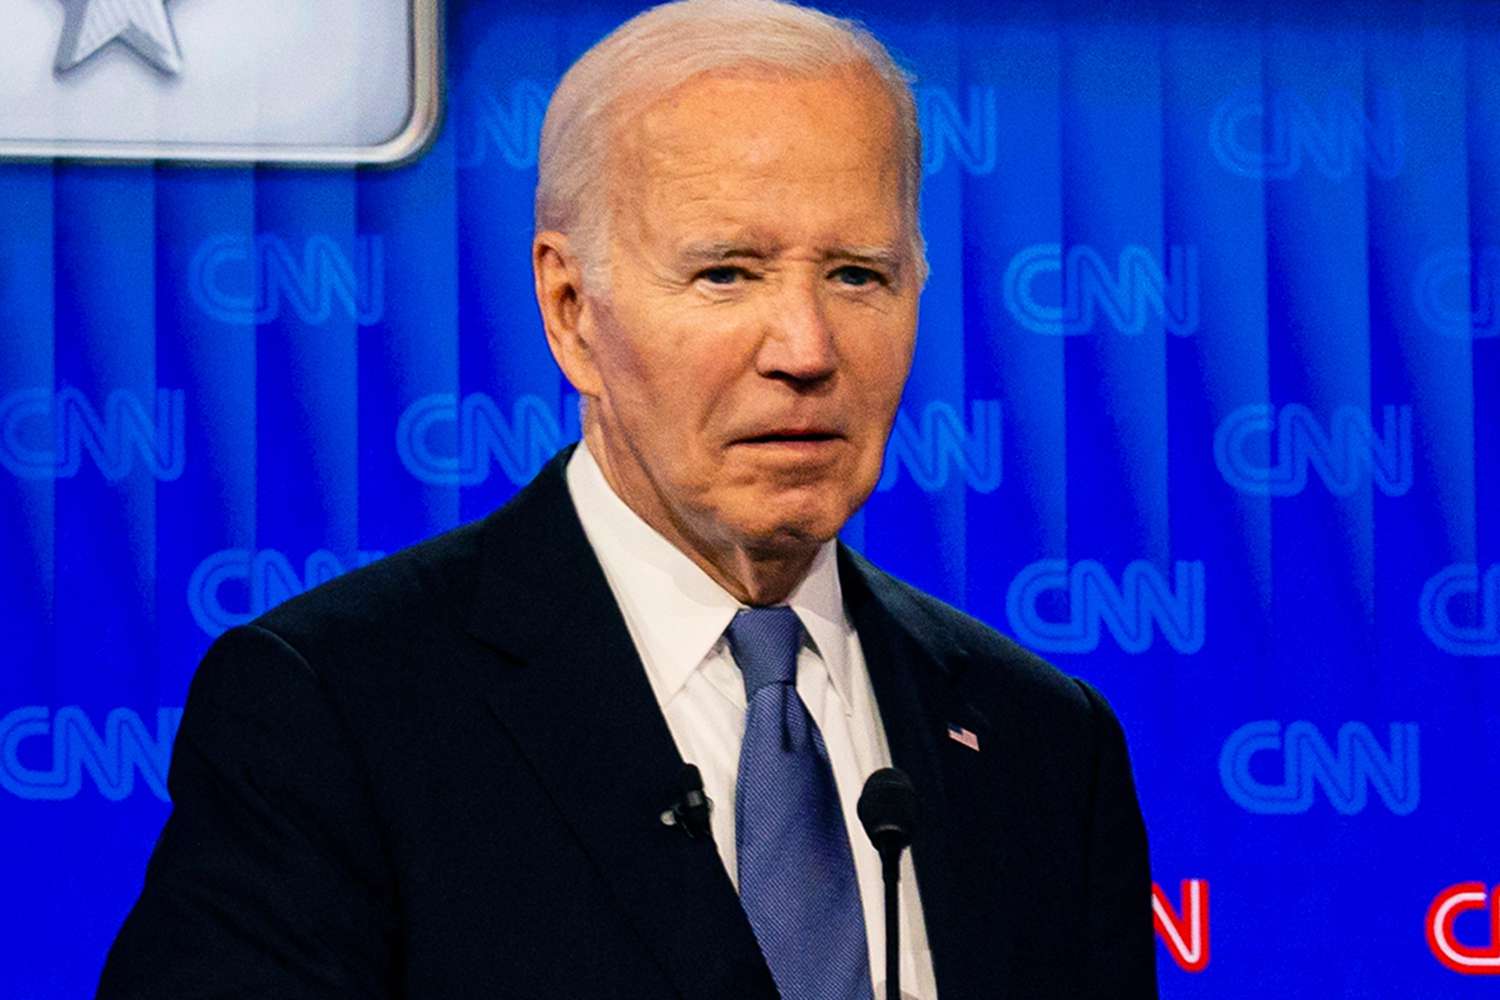 US President Joe Biden during the first presidential debate with former US President Donald Trump, not pictured, in Atlanta, Georgia, US